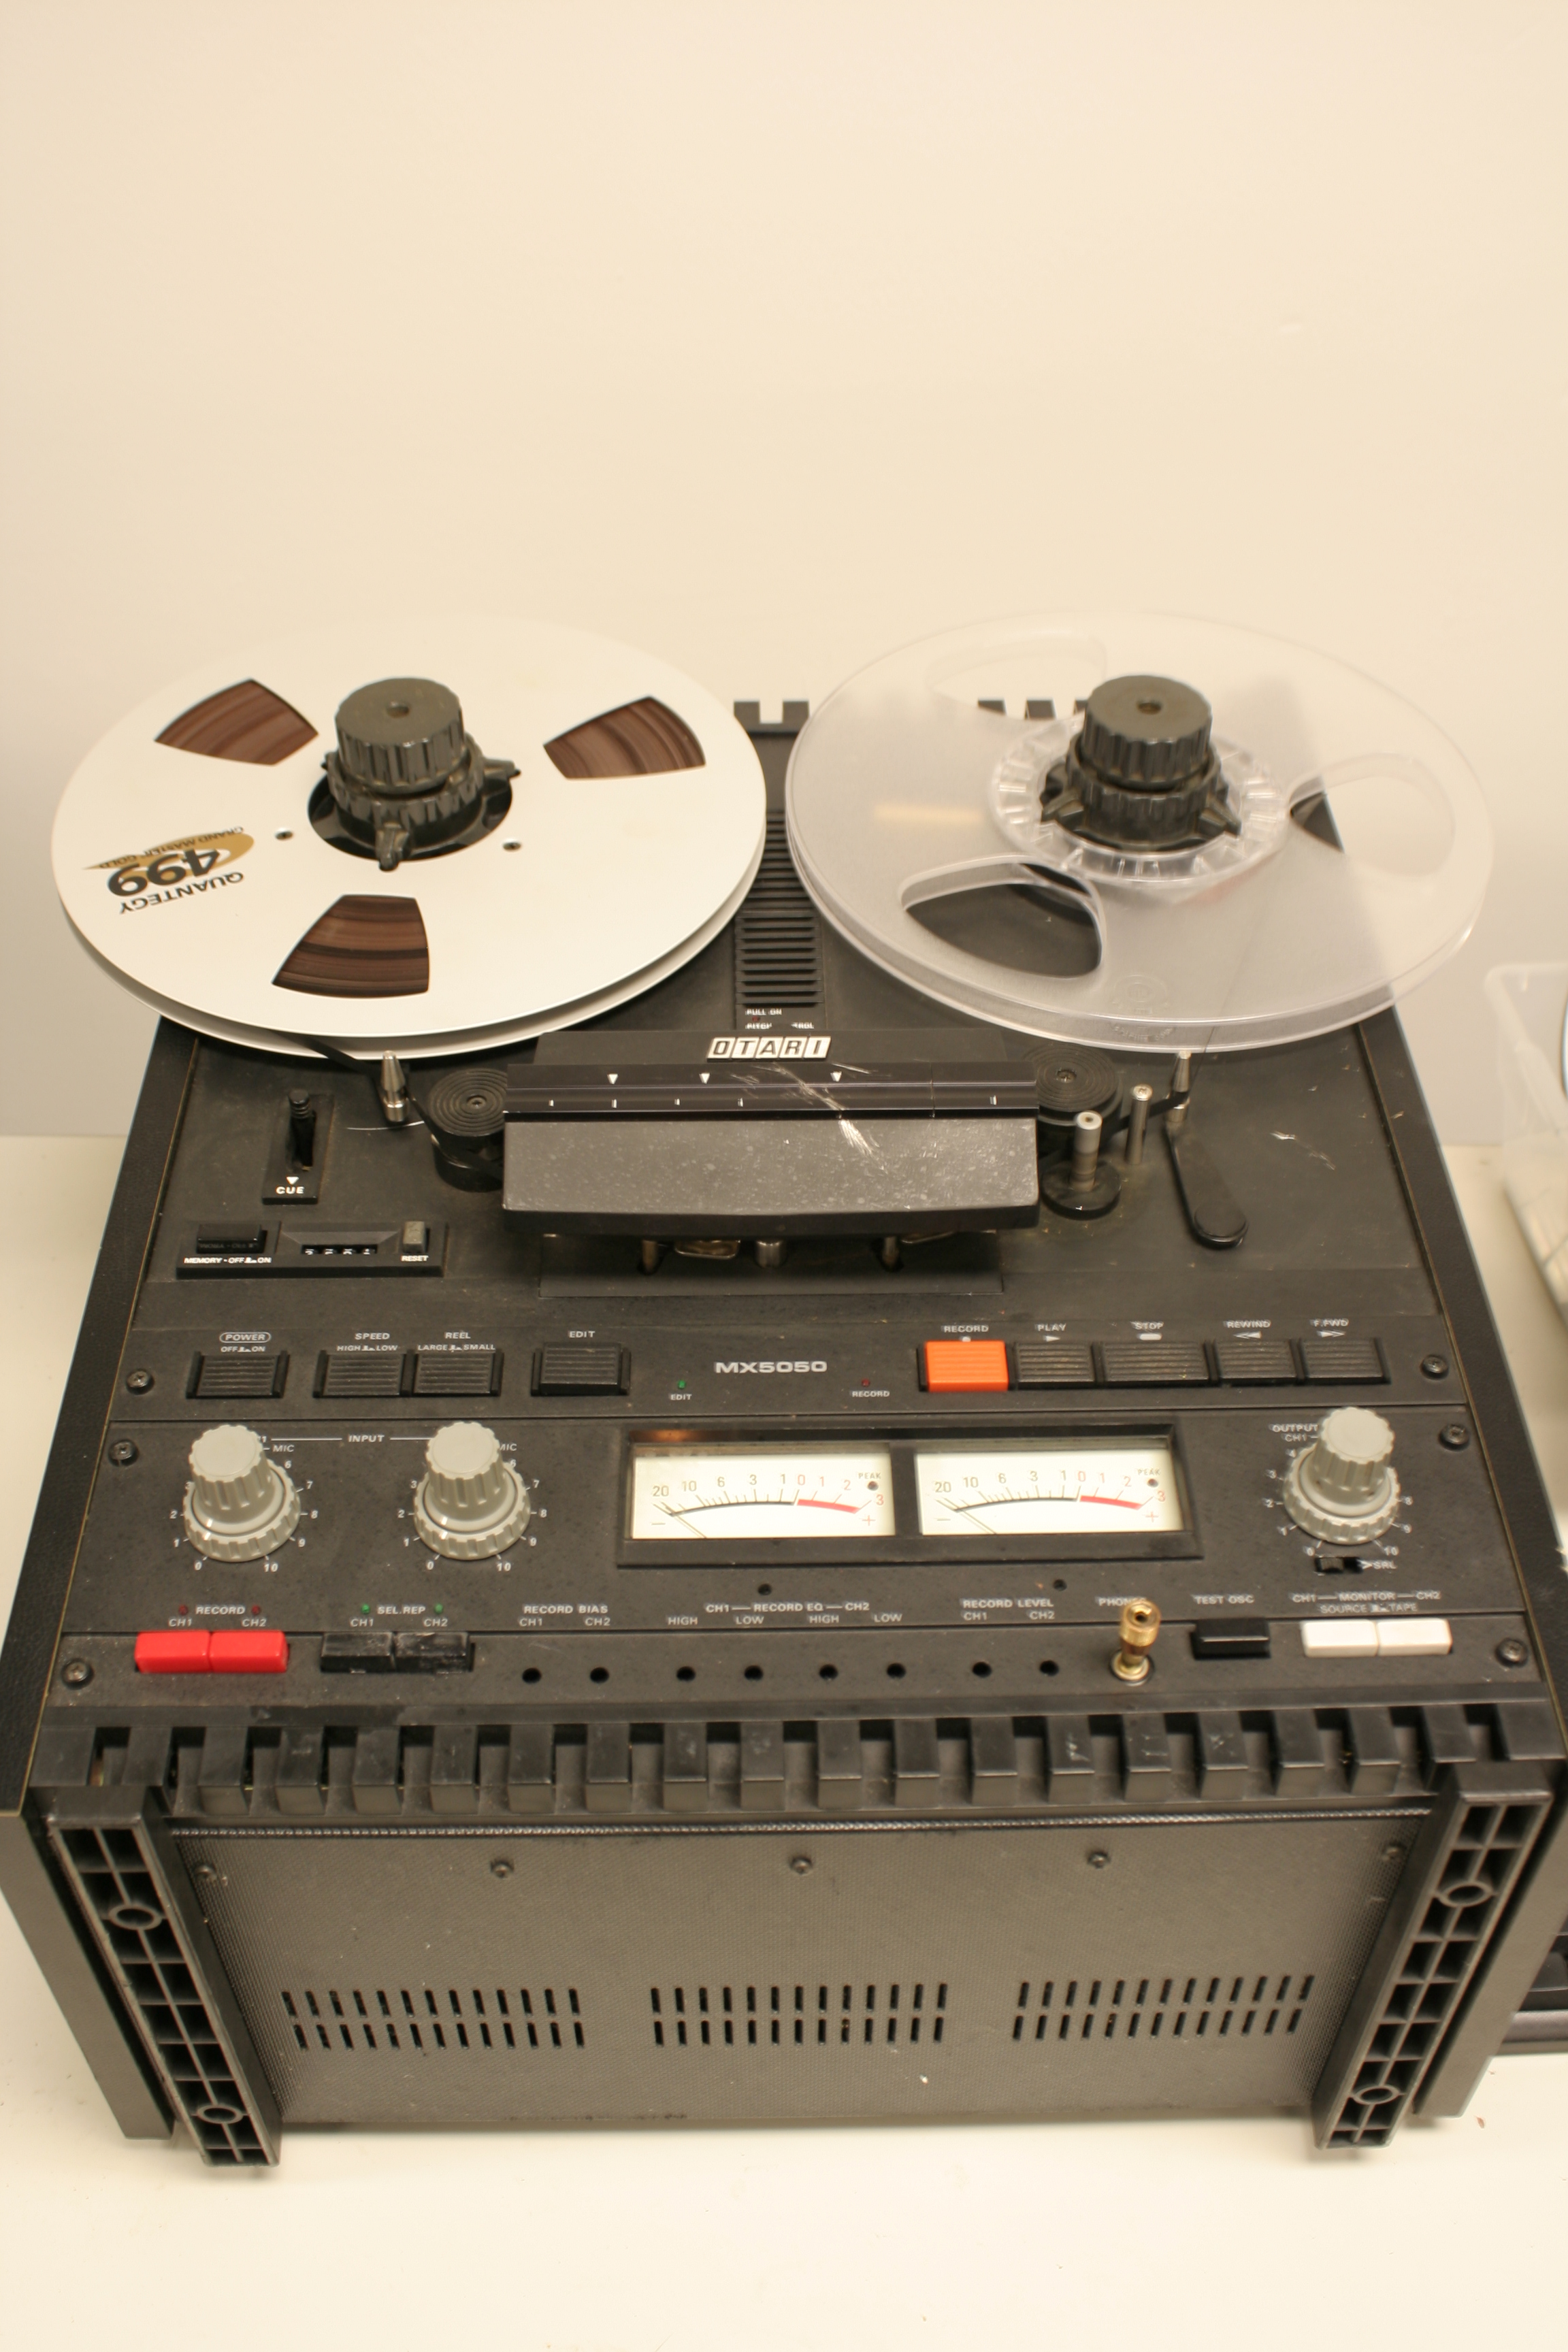 Conversion Of Reel-To-Reel Tapes To Digital - Two Squares